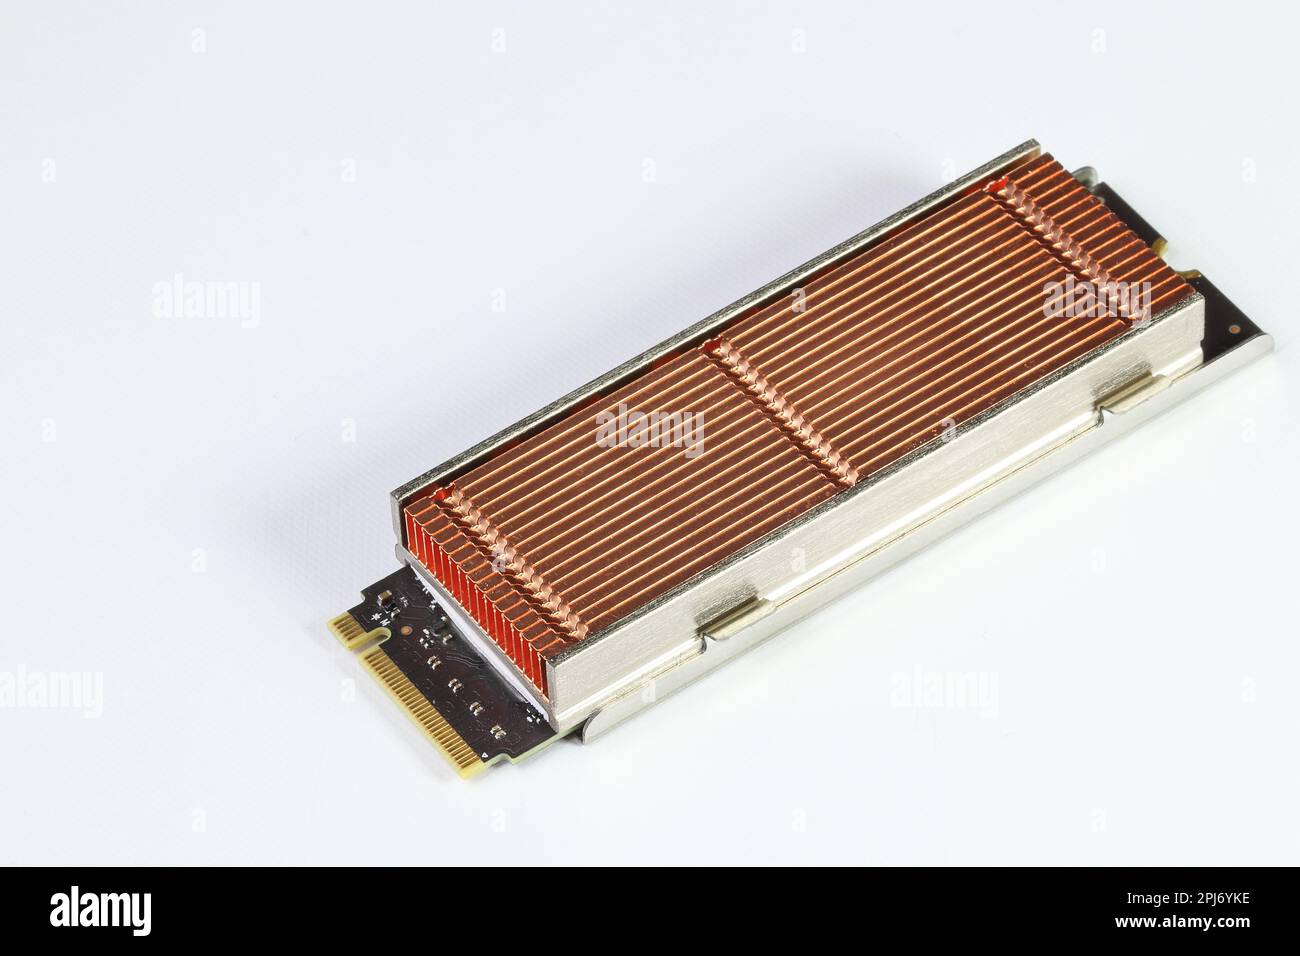 Solid state drives with copper heat sink for computer - ssd sata, NVME PCIe, SATA SSD m key, b key isolated on white background. Stock Photo